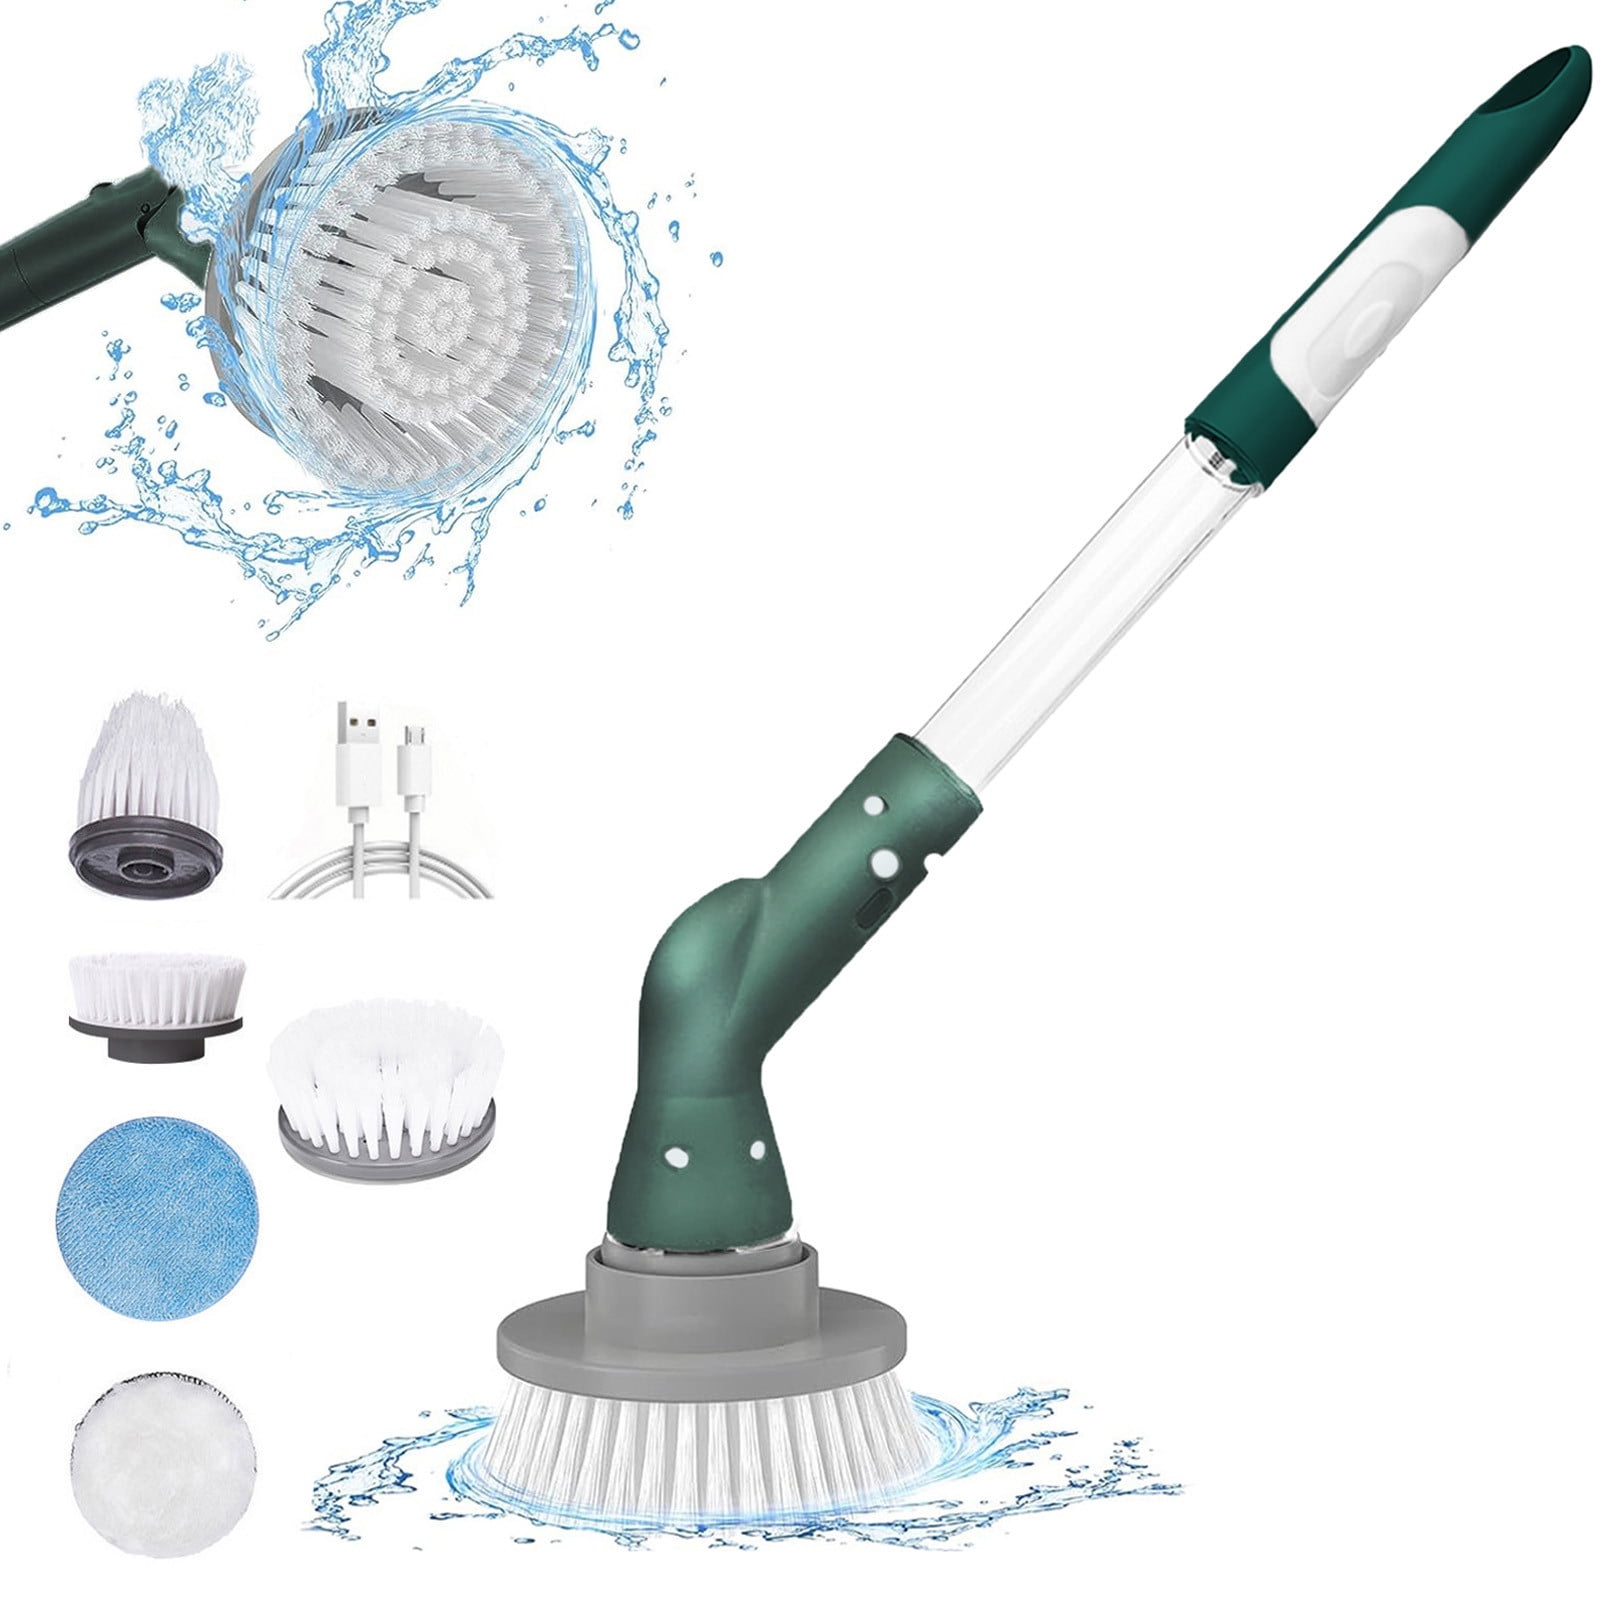 The Bomves Store Electric Spin Scrubber Is $55 at